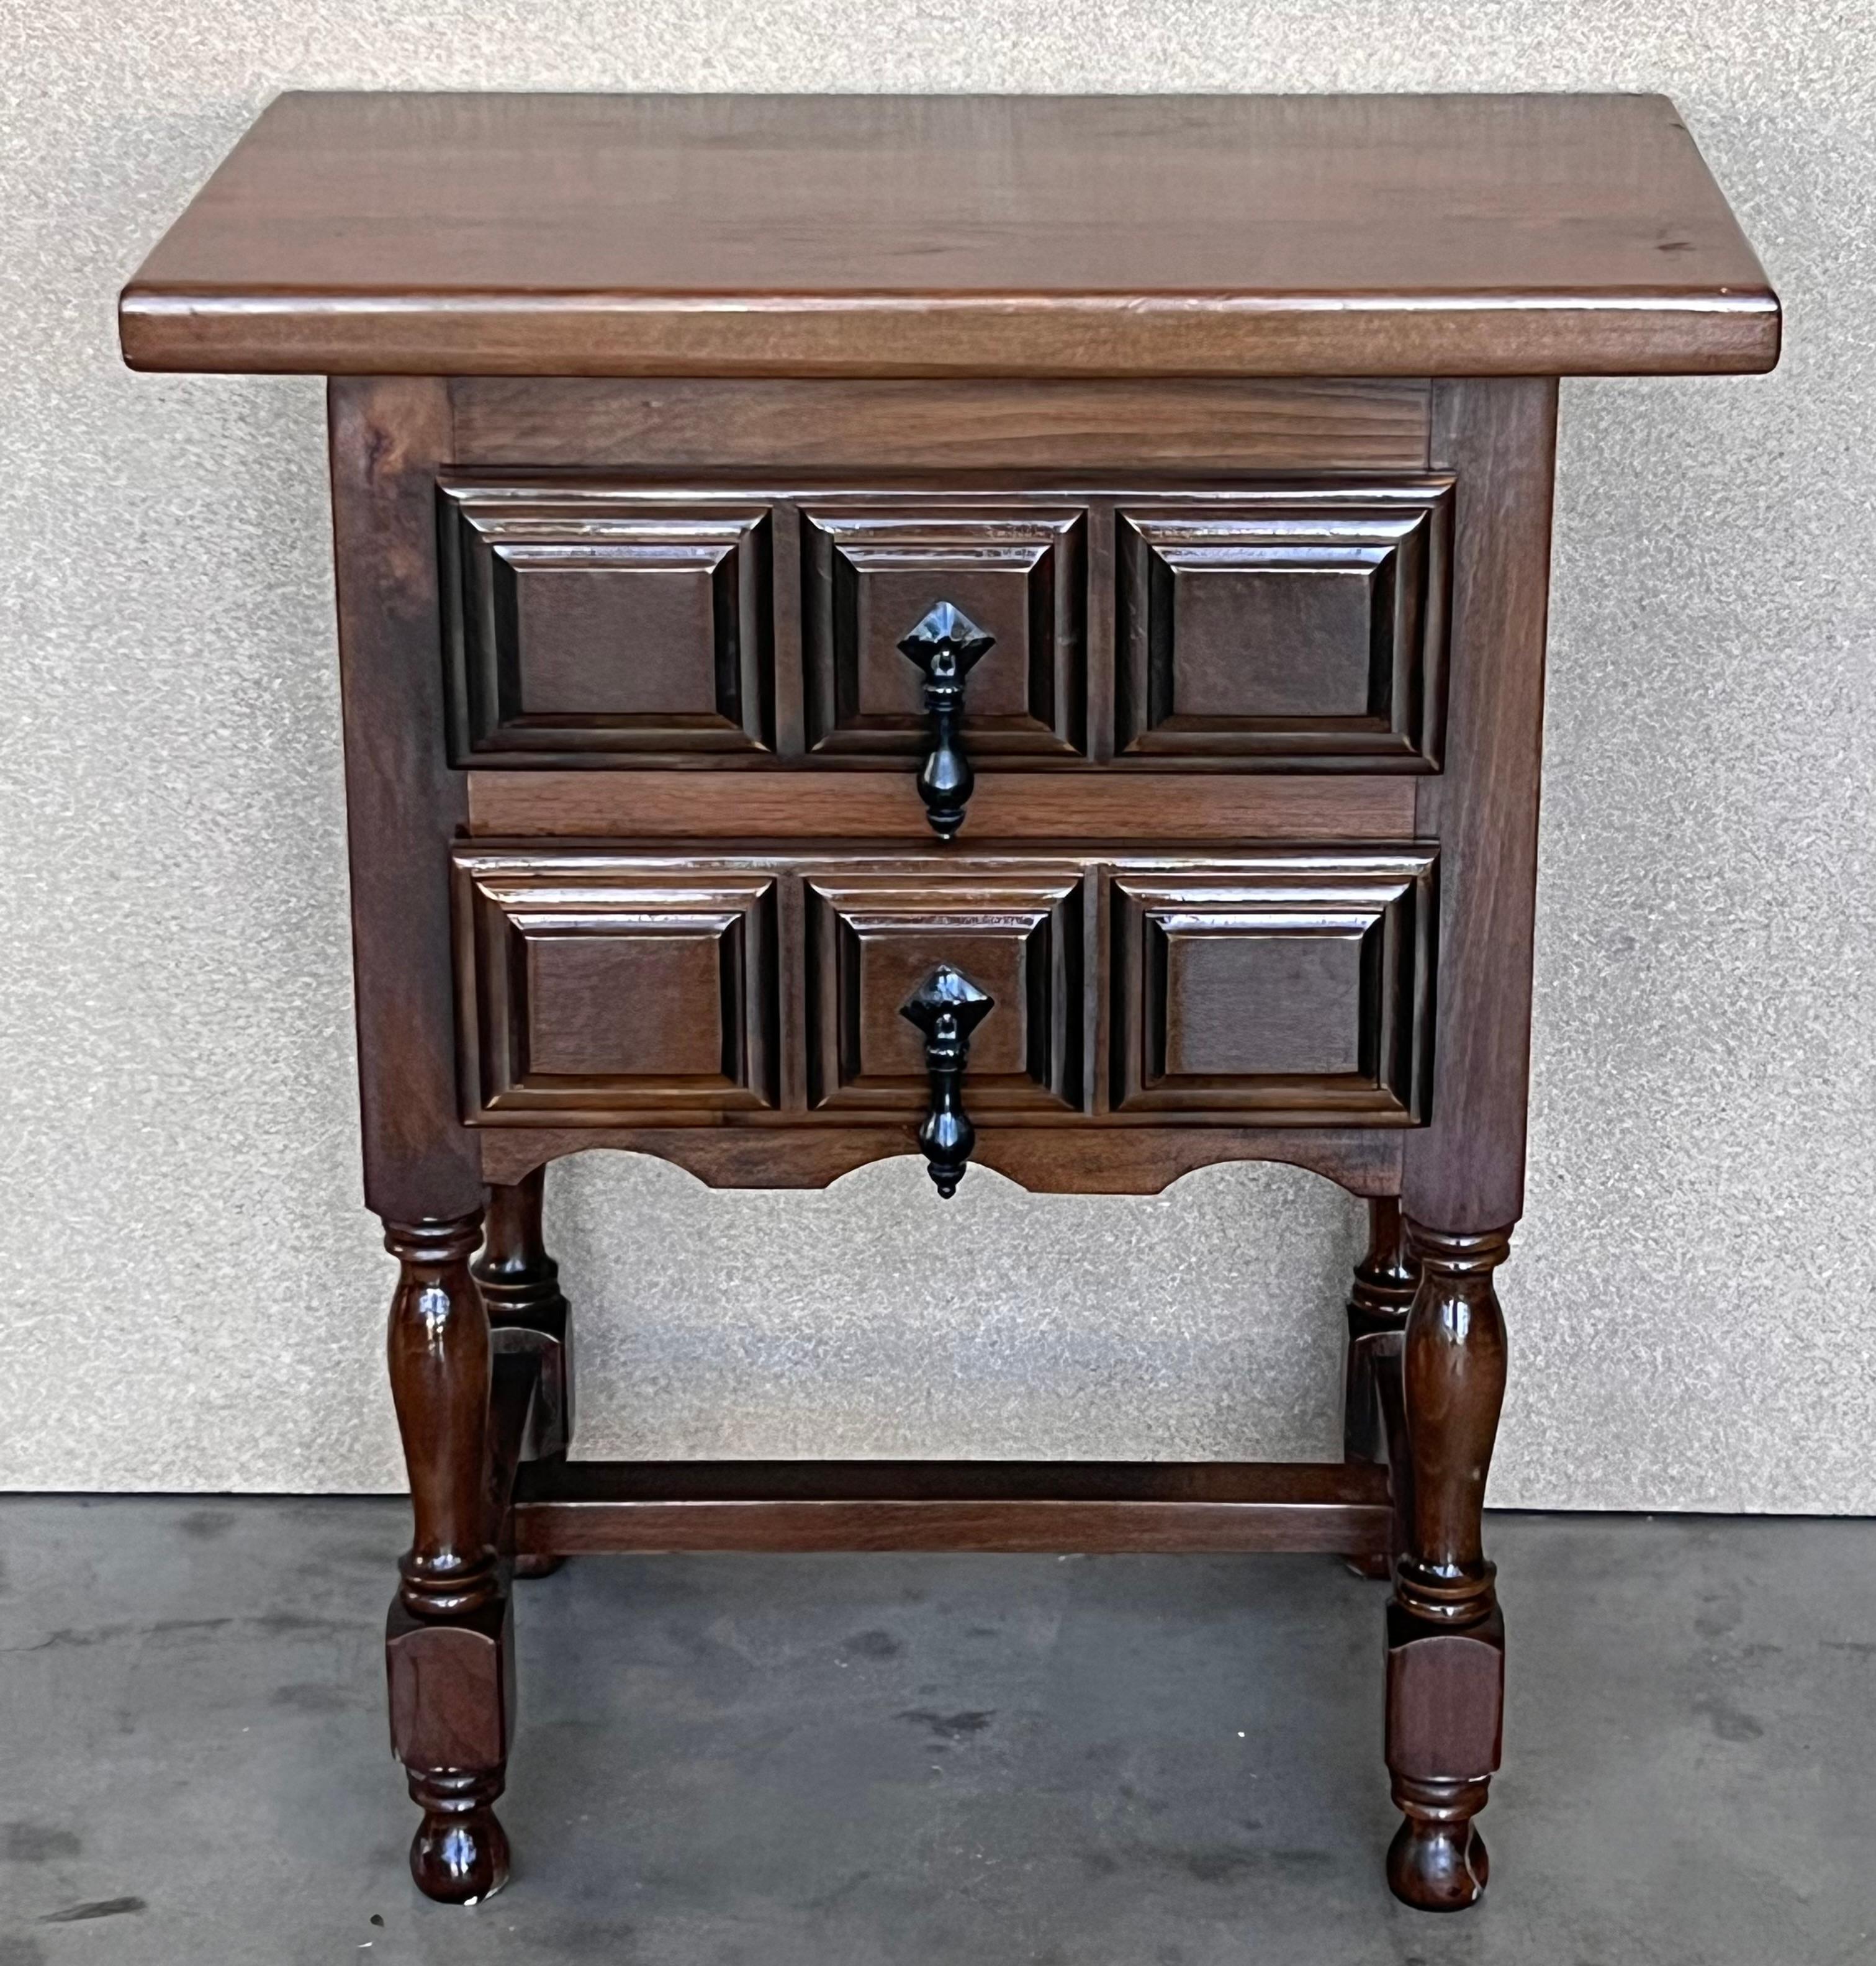 20th century pair of Spanish nightstands with two carved drawer and iron hardware and crest in the low part of the drawers.
Beautiful tables that you can use like a nightstands or side tables, end tables... or table lamp.